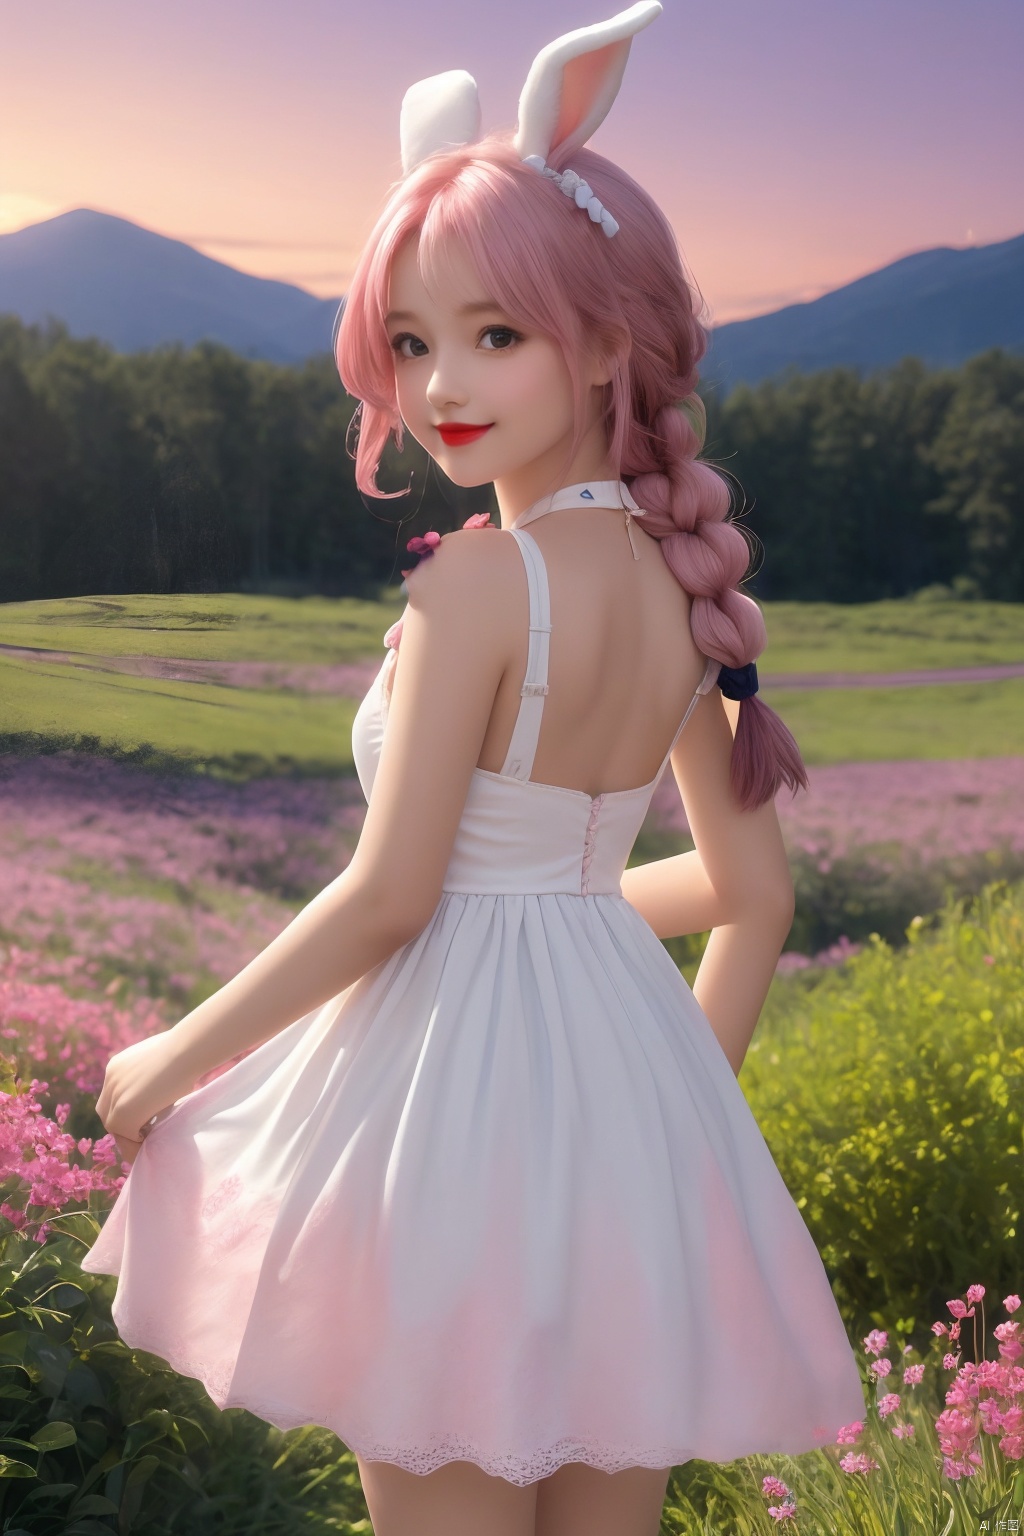 A girl is on a country road,the country road is planted with flowers of various colors on both sides,(before the girl is a little rabbit running to the girl),the girl is touching the flowers with her hands,Winding road,in front of a row of mountains,the main color of the mountain is purple,pink sky,sunset,watercolor,soft color rendering,A very lovely little girl,cute kawaii girl,chibi,(The girl wears a white dress,) Pink hair,braid,medium hair,A pink bow,blush,smile,(Girls don't stand out),From the back,(full view), red lips